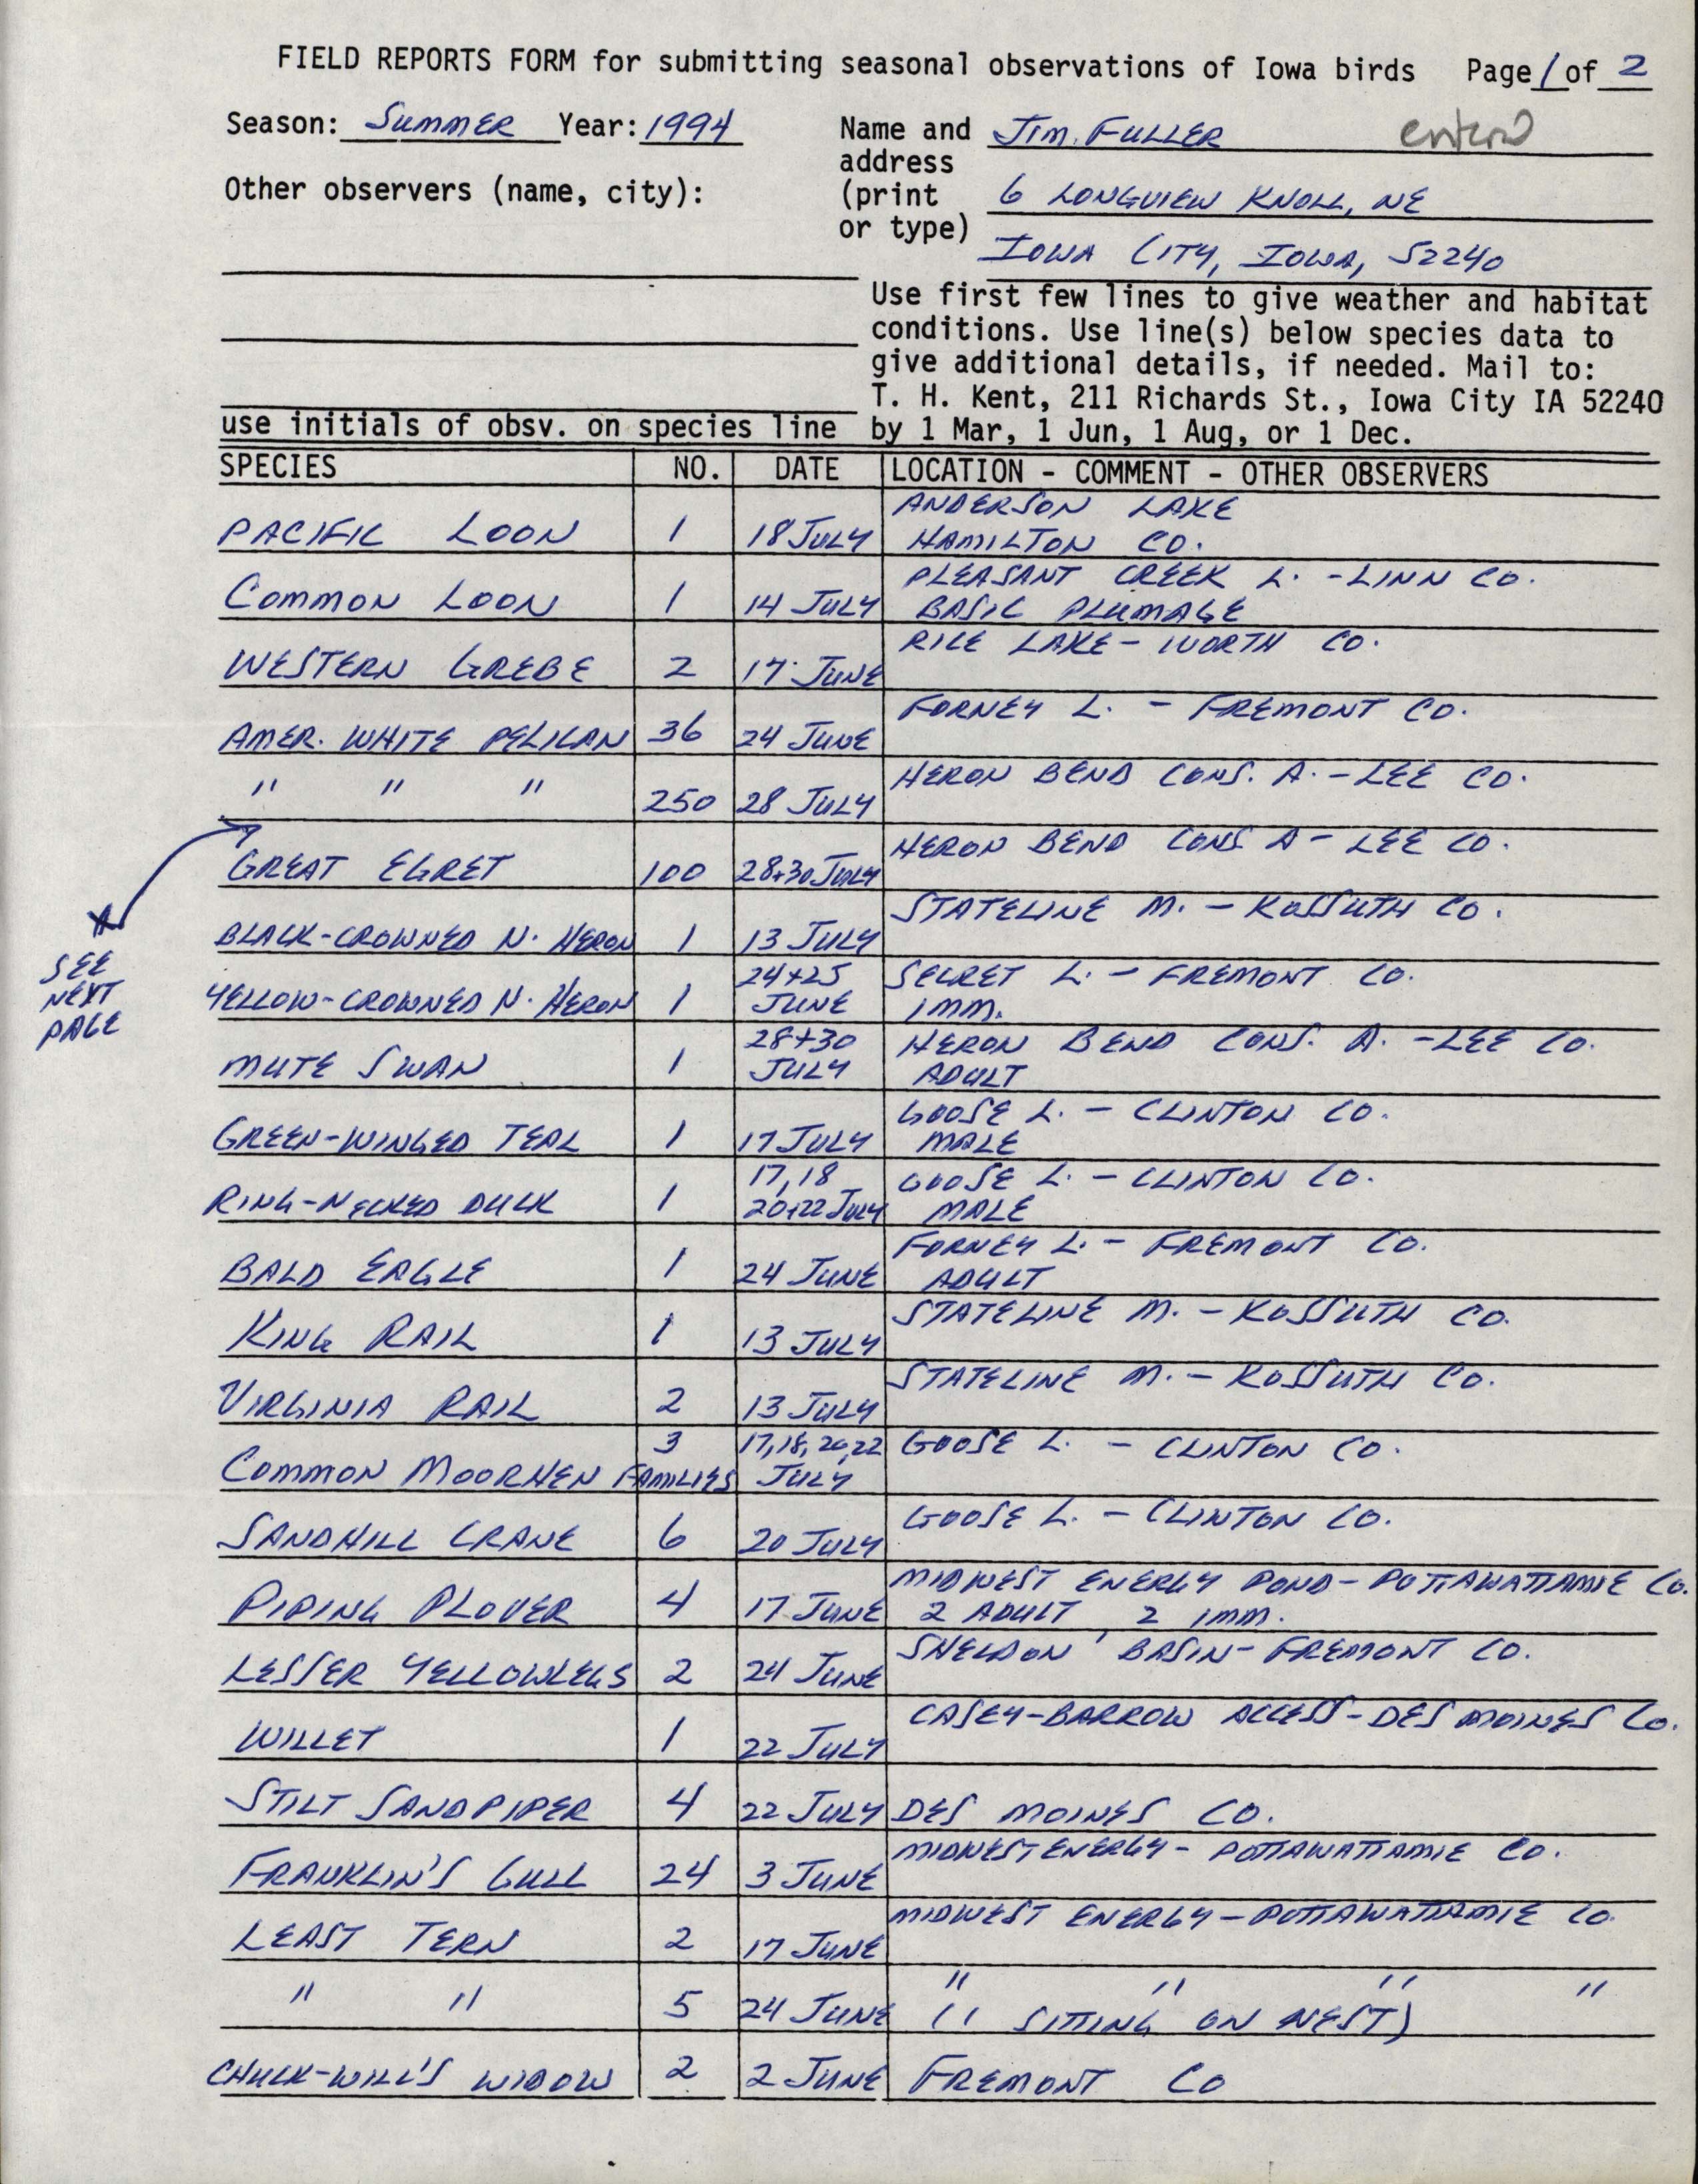 Field reports form for submitting seasonal observations of Iowa birds, Jim Fuller, Summer 1994